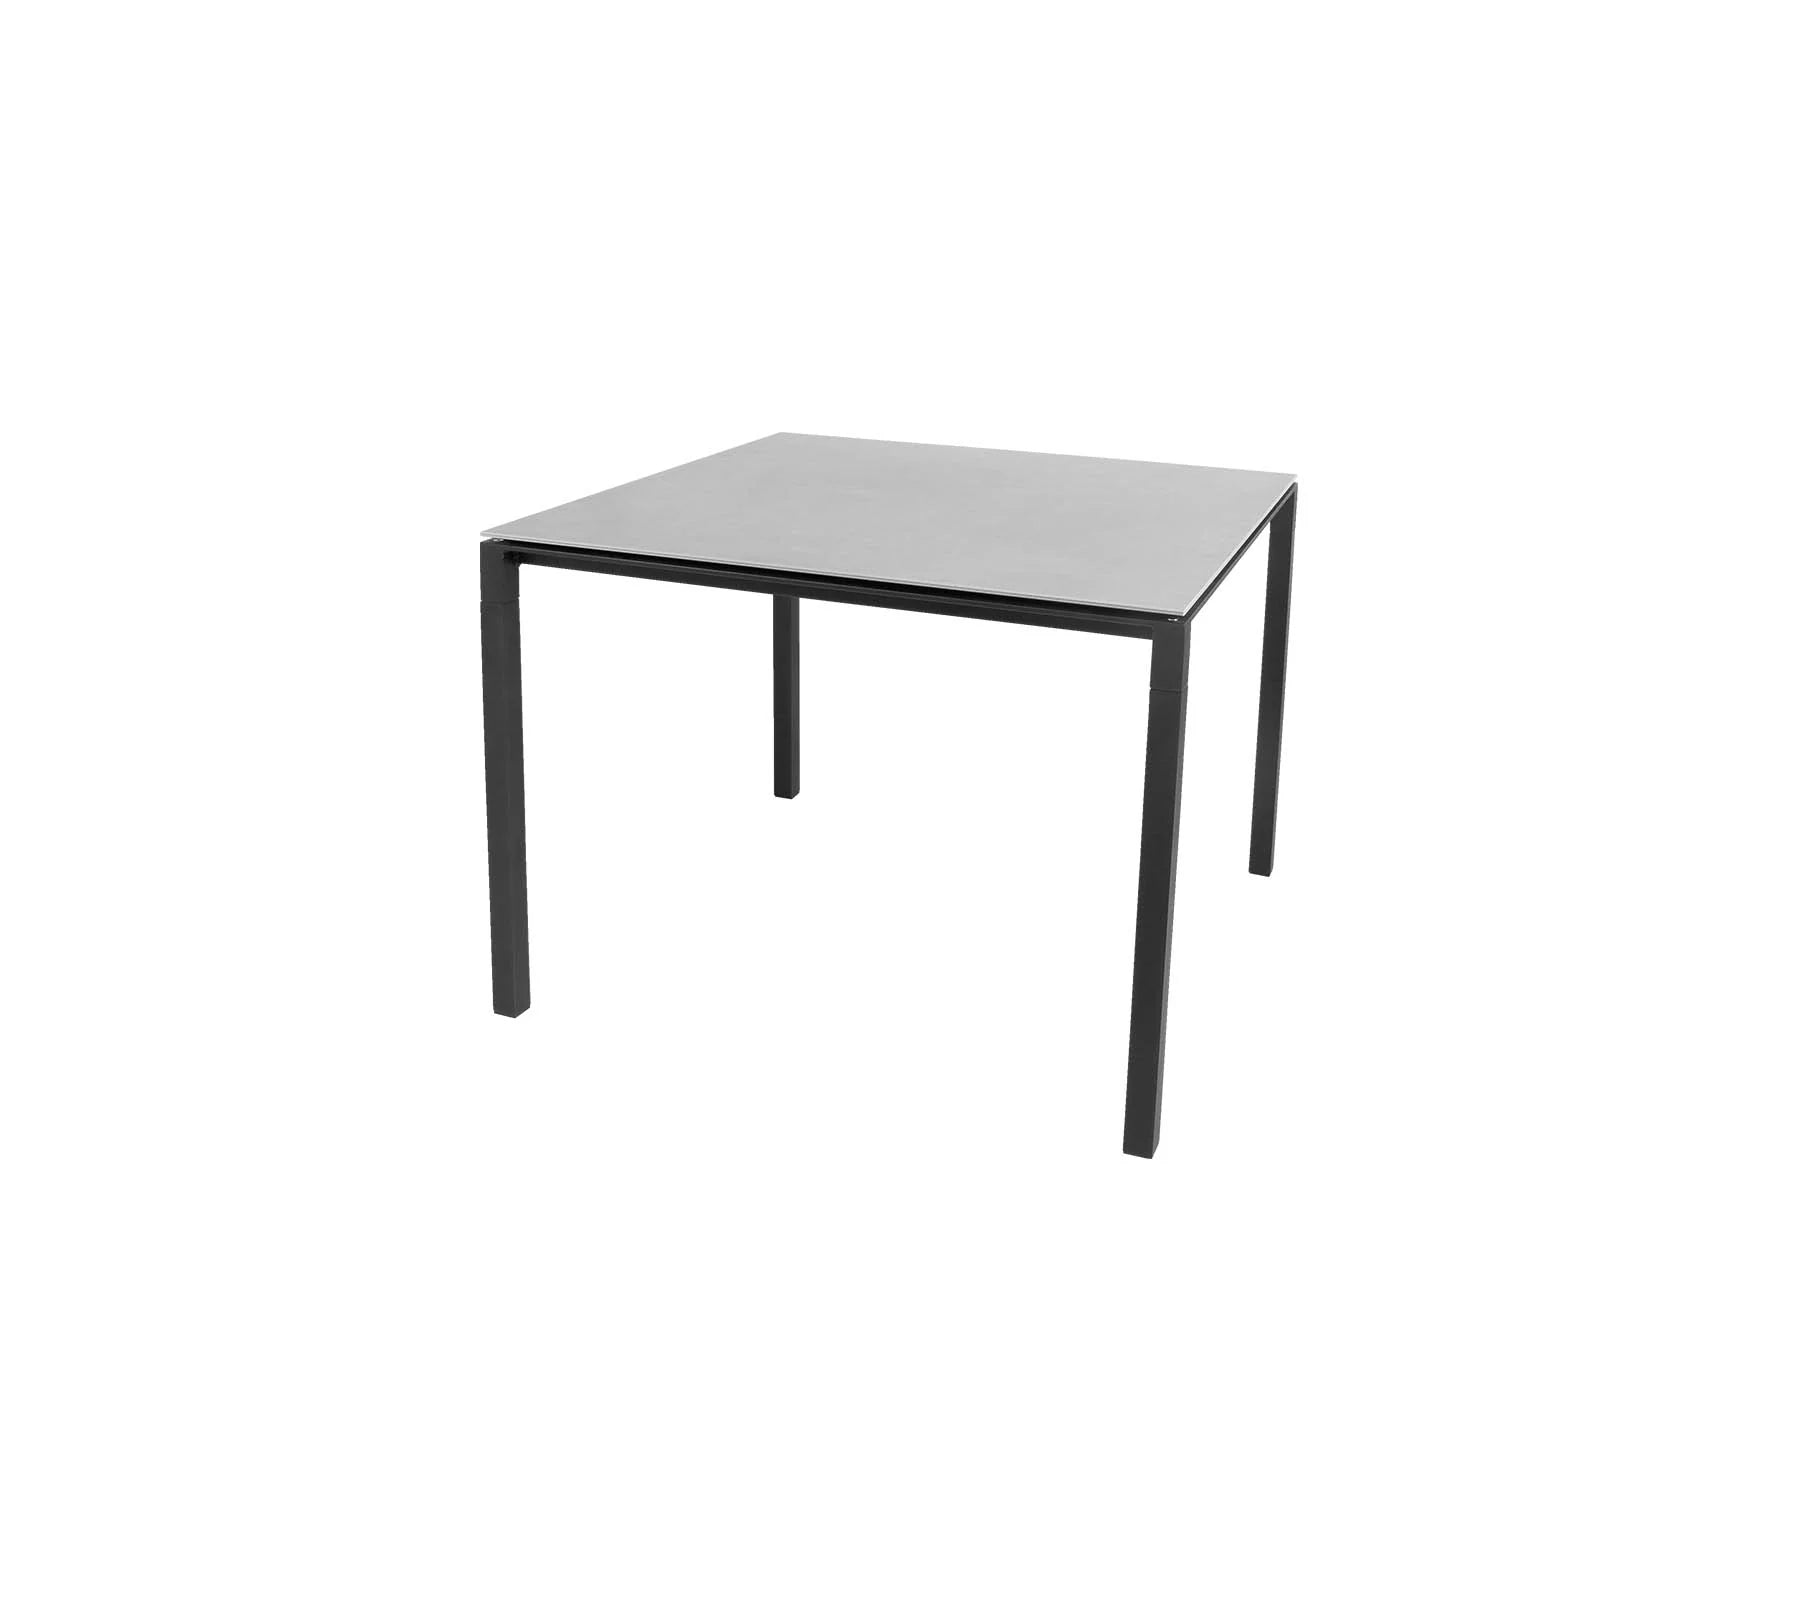 Boxhill's Pure lava grey aluminum outdoor square dining table with light grey table top on white background